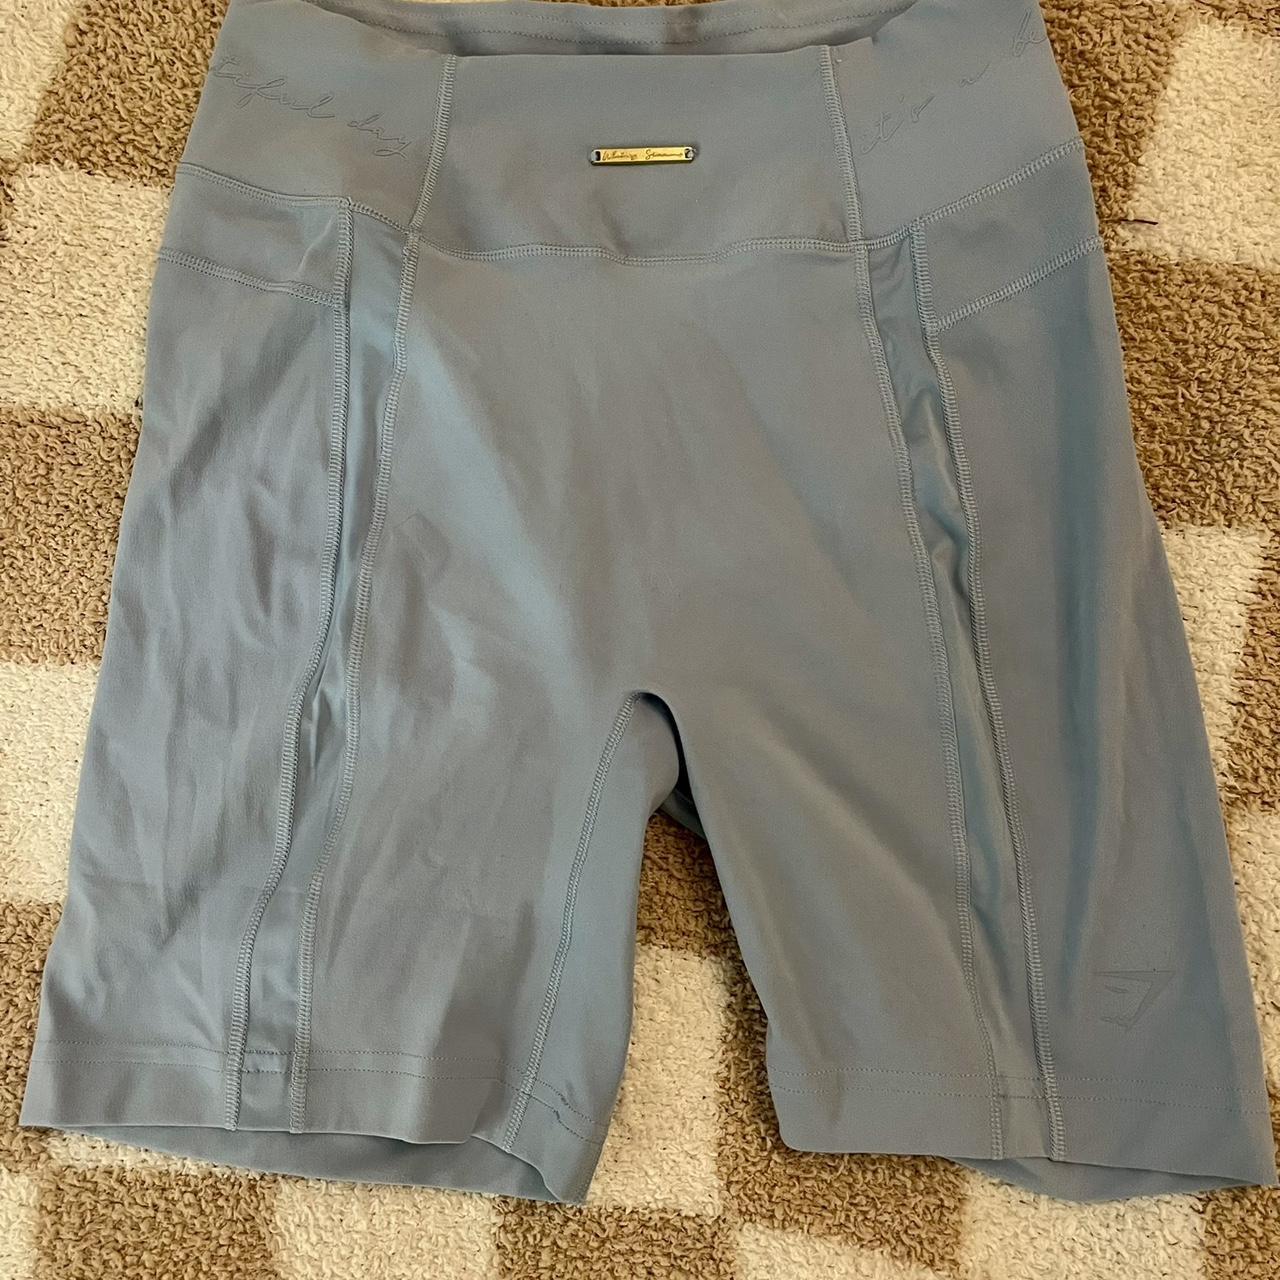 Ex Gymshark Whitney Simmons Cycling Shorts – Afford The Style